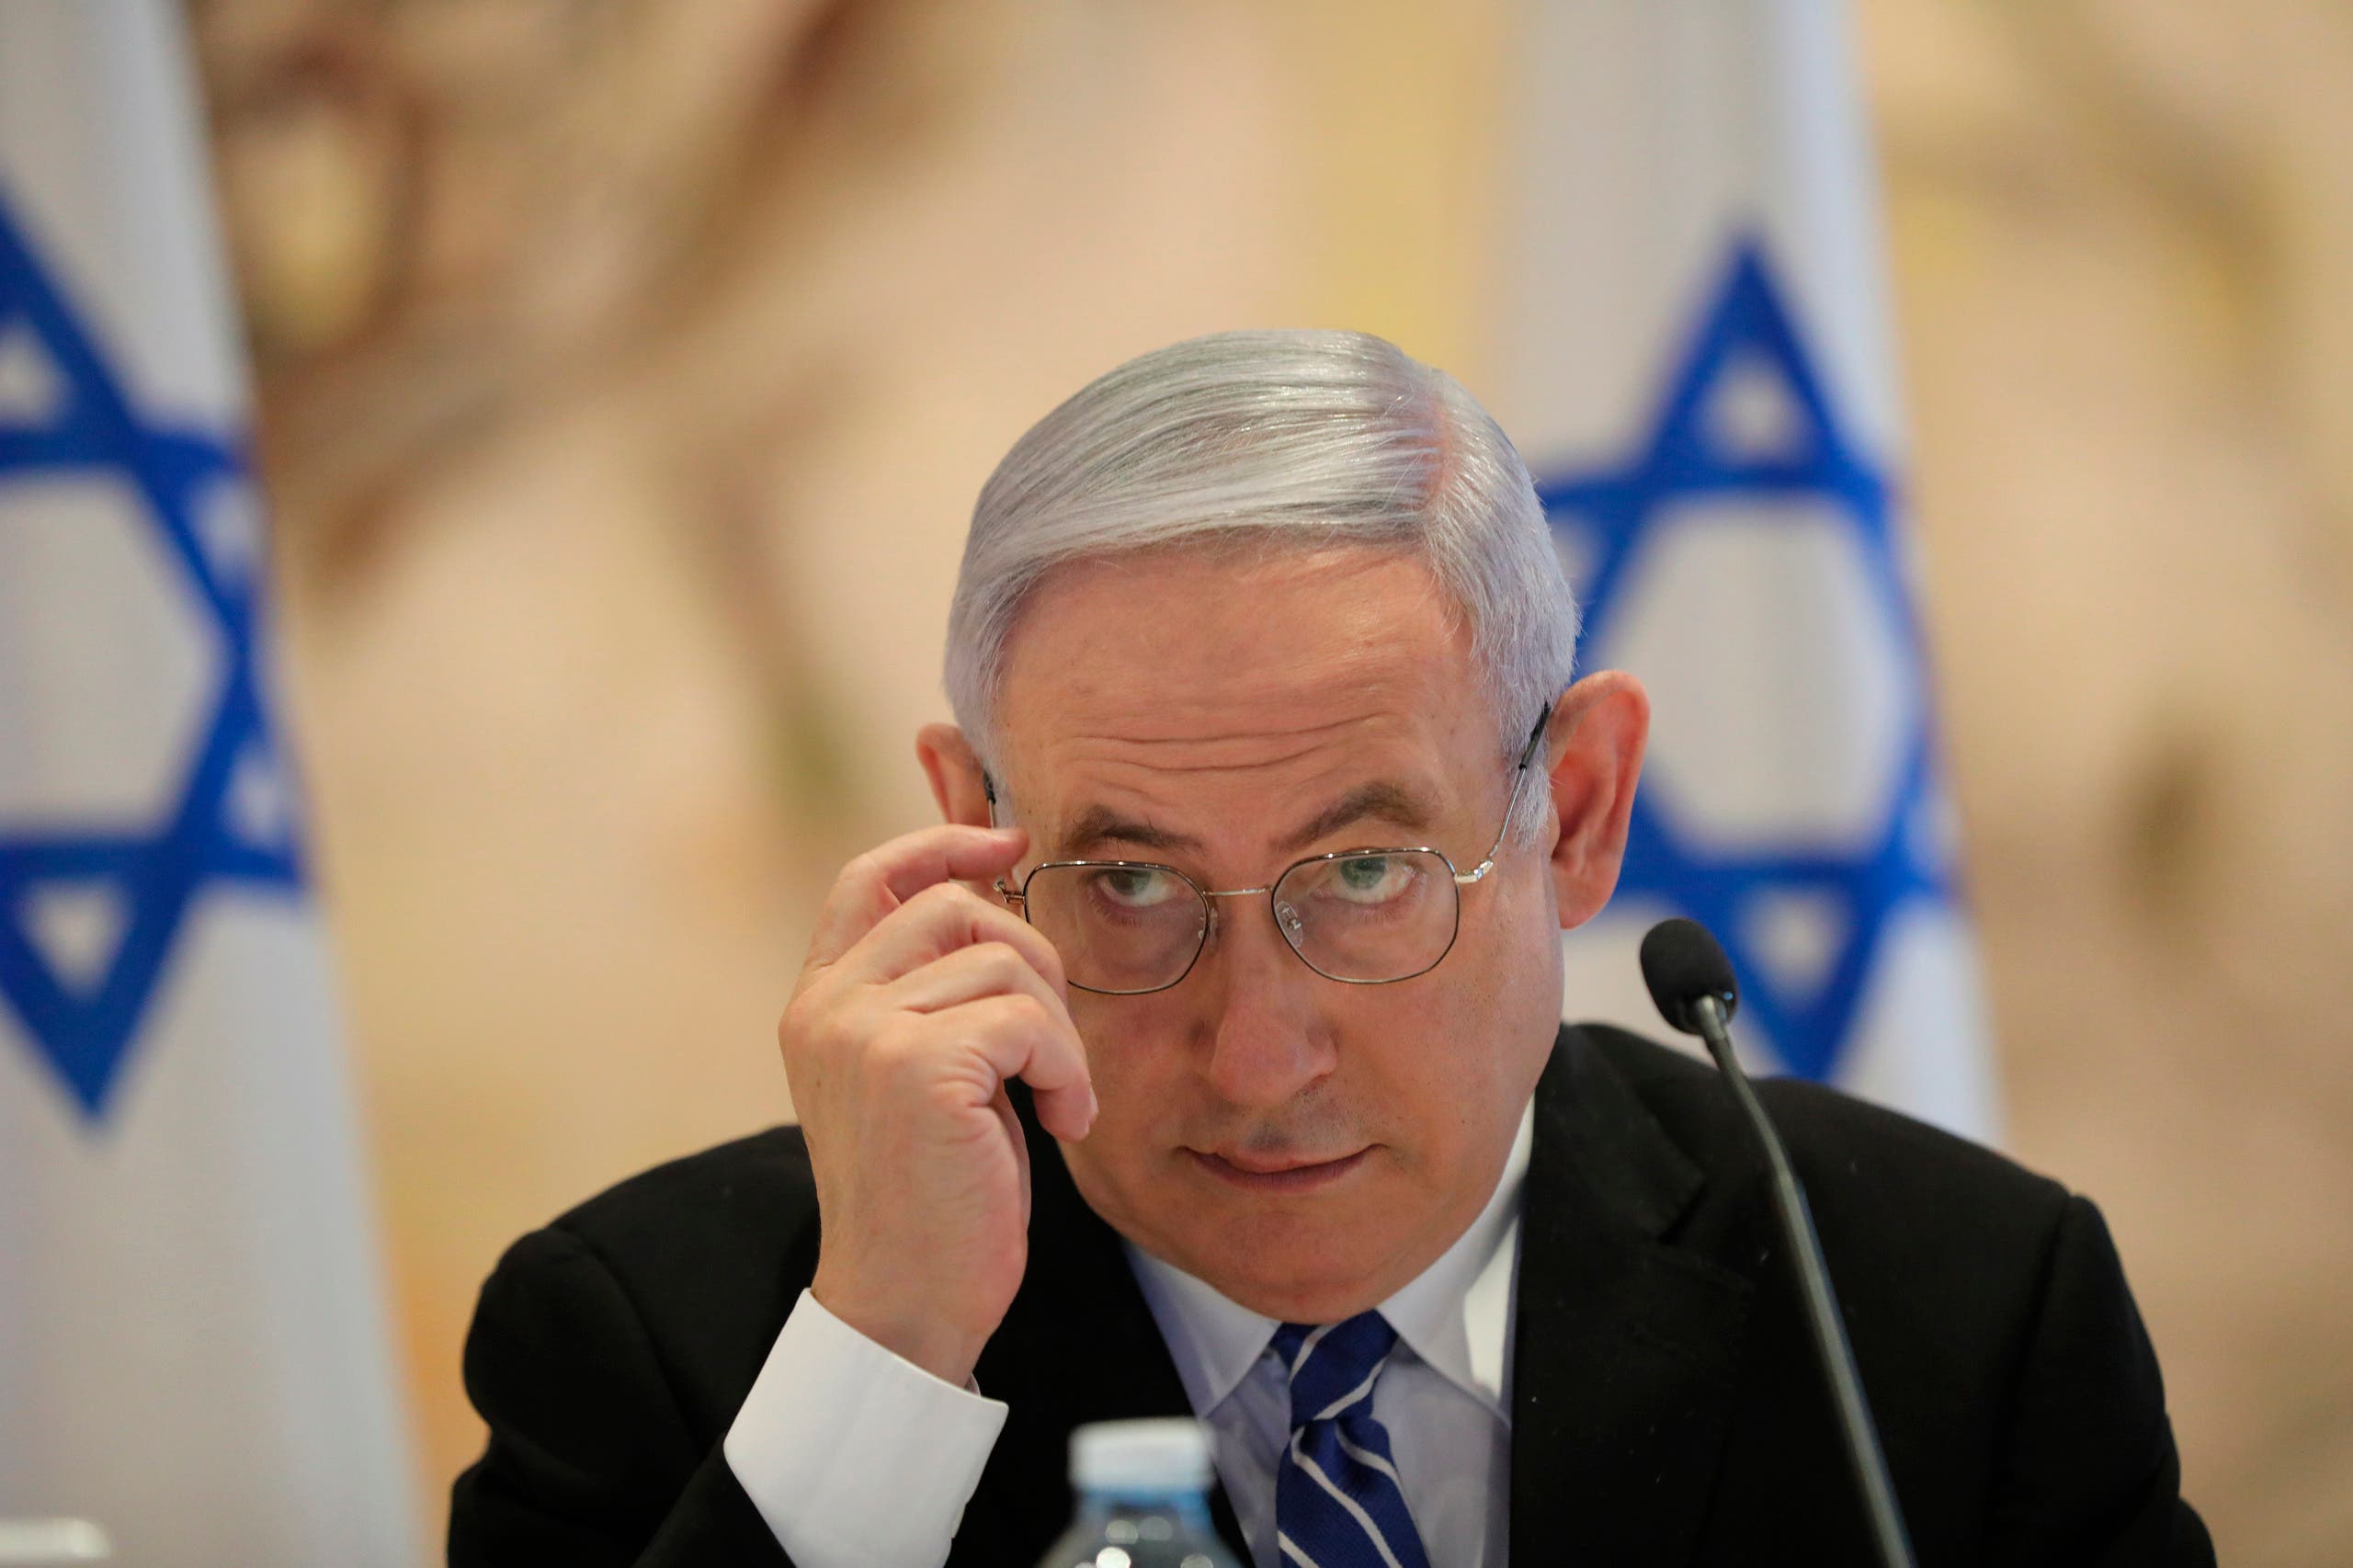 Israeli Prime Minister Benjamin Netanyahu attends the first Cabinet meeting of the new government at the Knesset, the Israeli Parliament in Jerusalem on May 24, 2020. (AP)